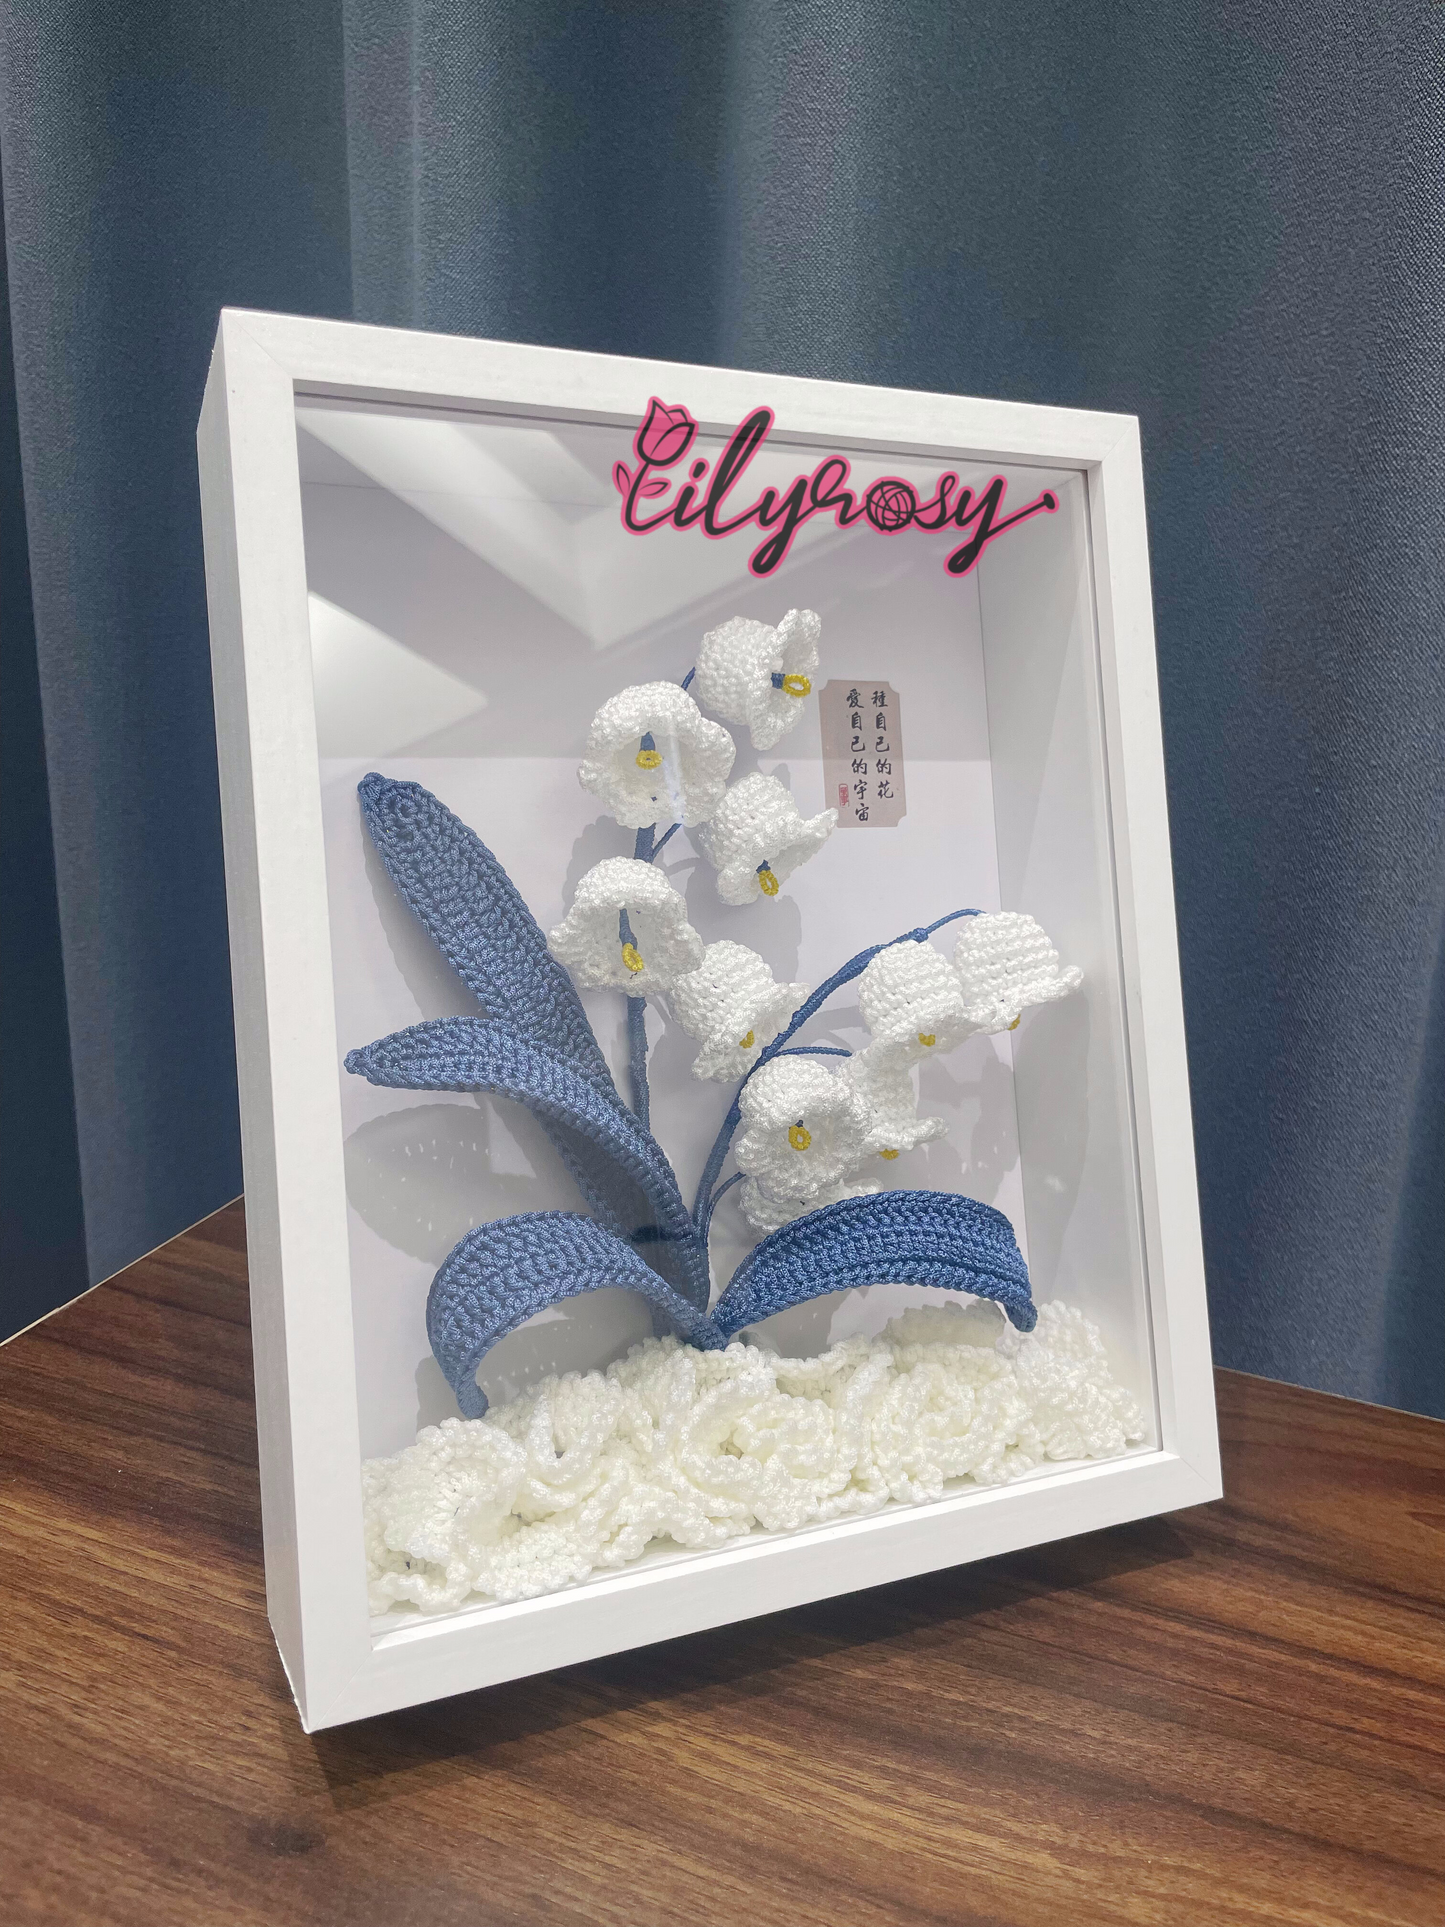 Handmade gifts|Crochet Lily of valley  photo frame ,table  Decor, Office decor,home decor